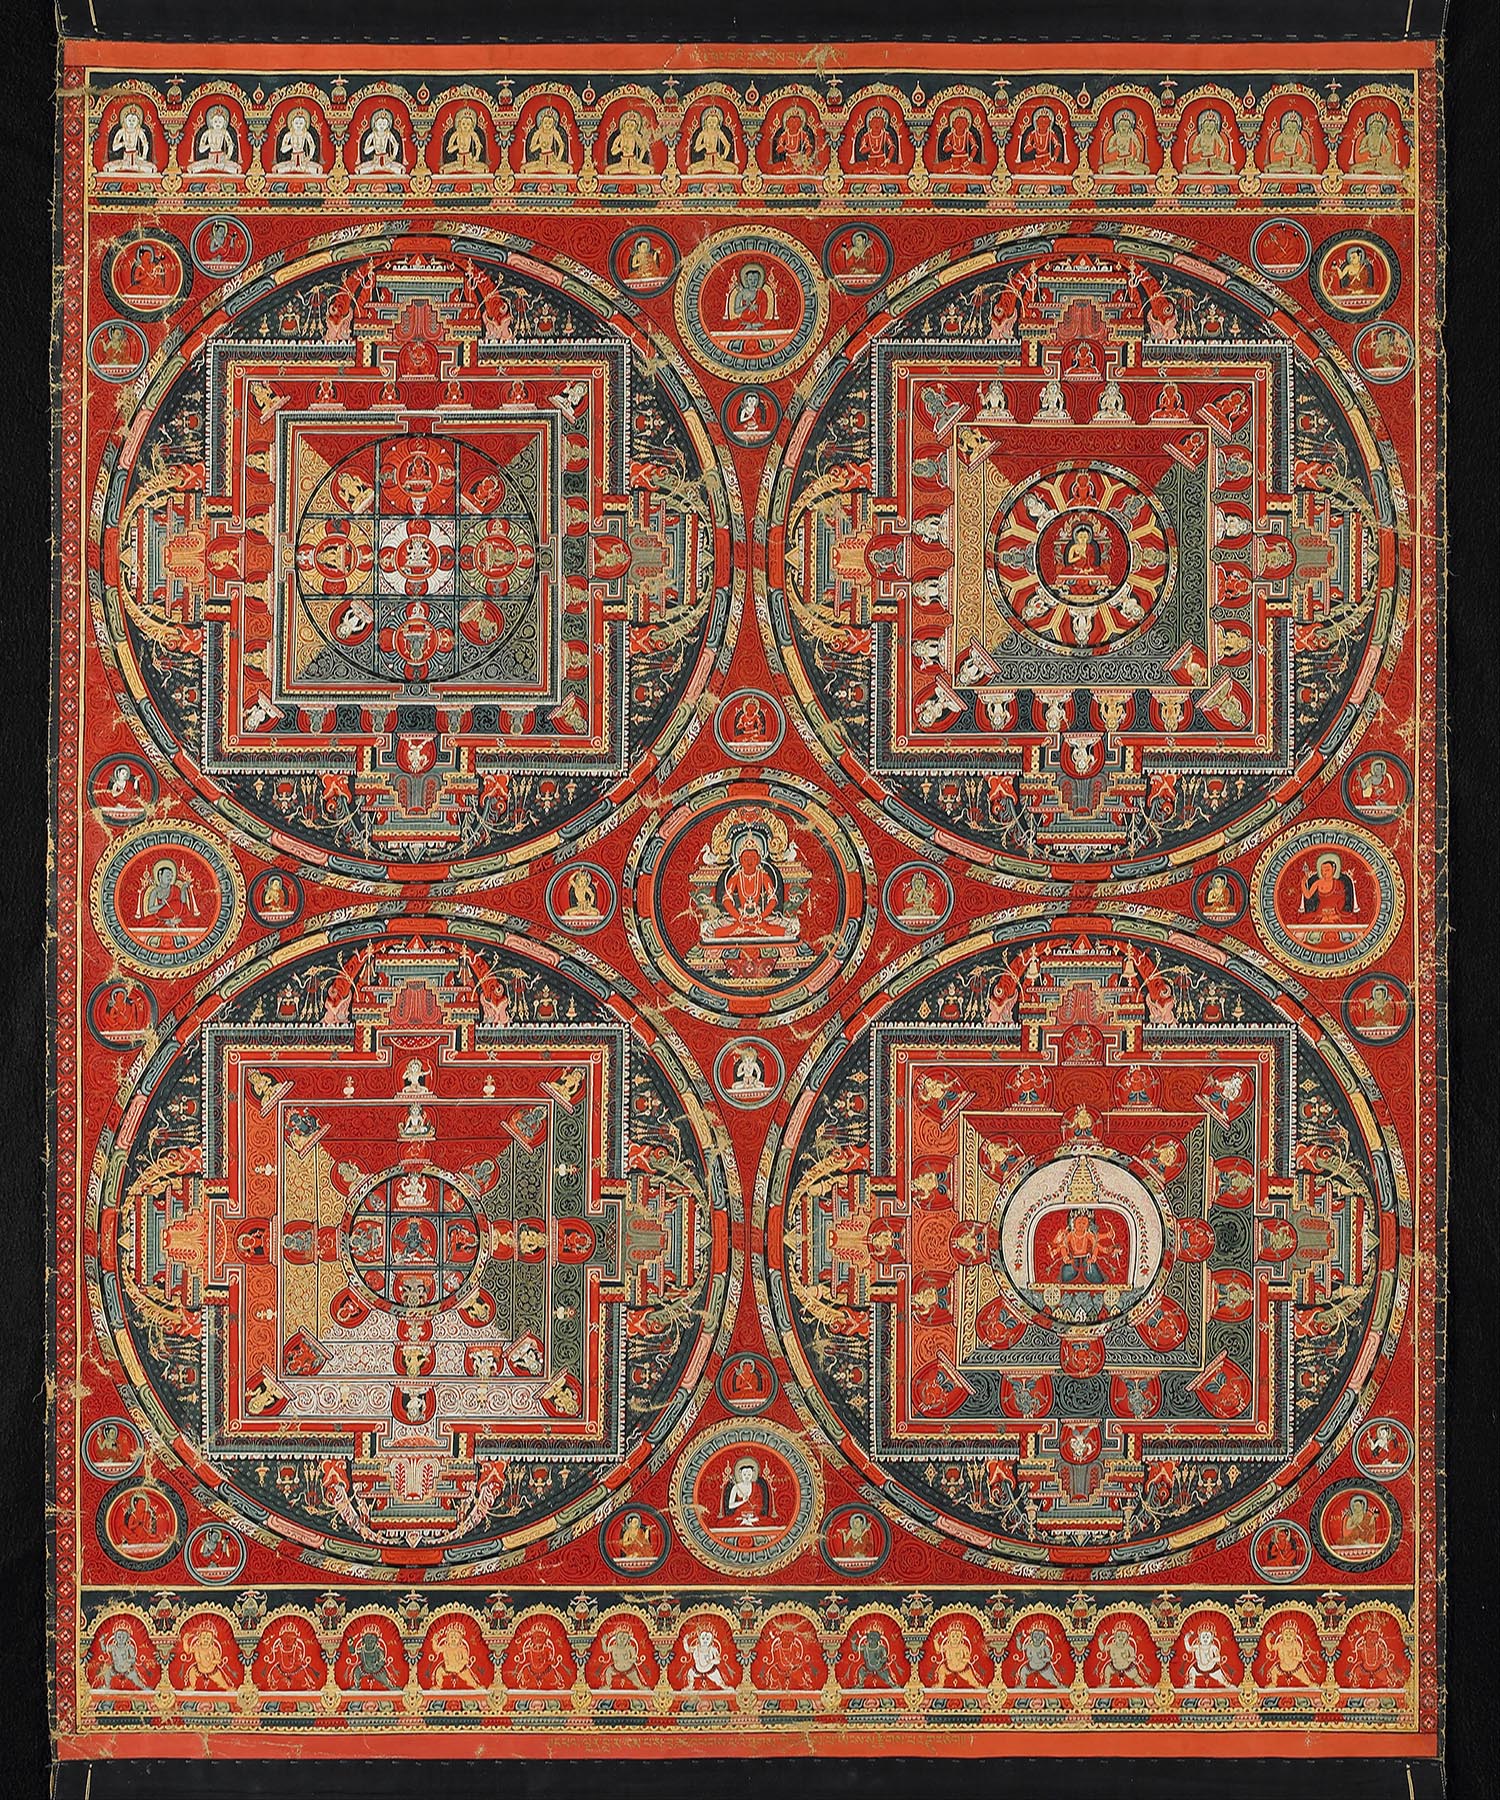 A Buddhist thangka with four circular mandalas, and religious figures in the main field and the borders.